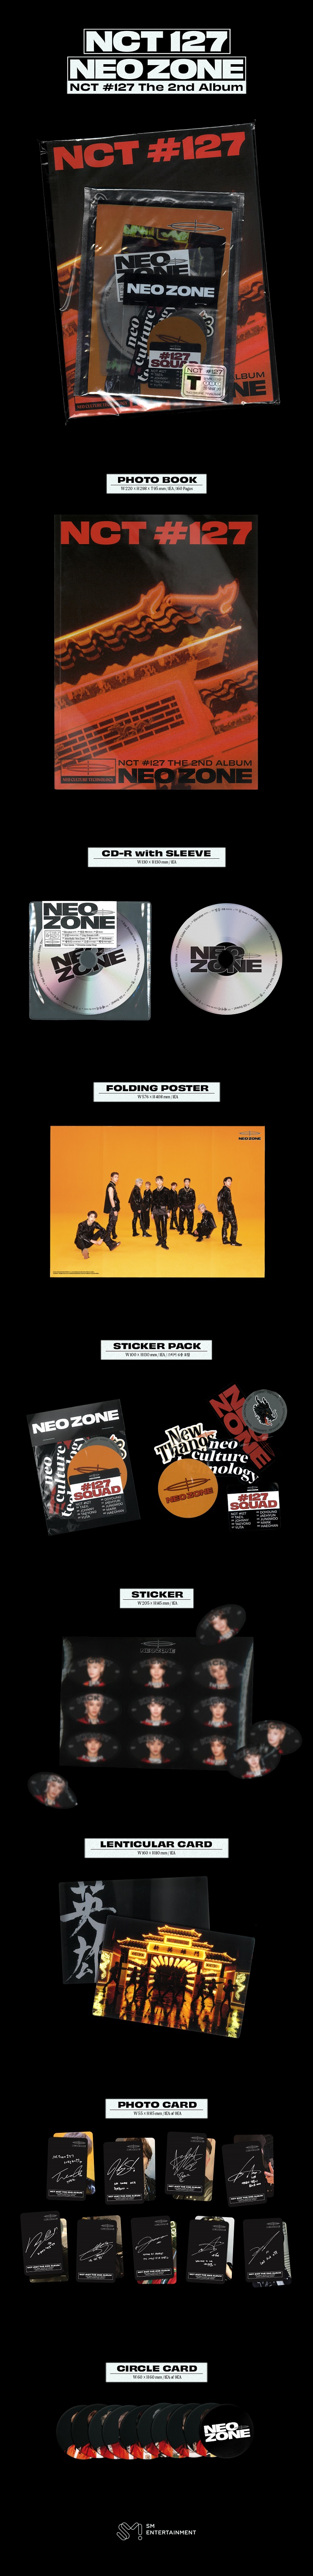 NCT 127(엔시티 127) - 2집 NCT #127 NEO ZONE [T Ver.]